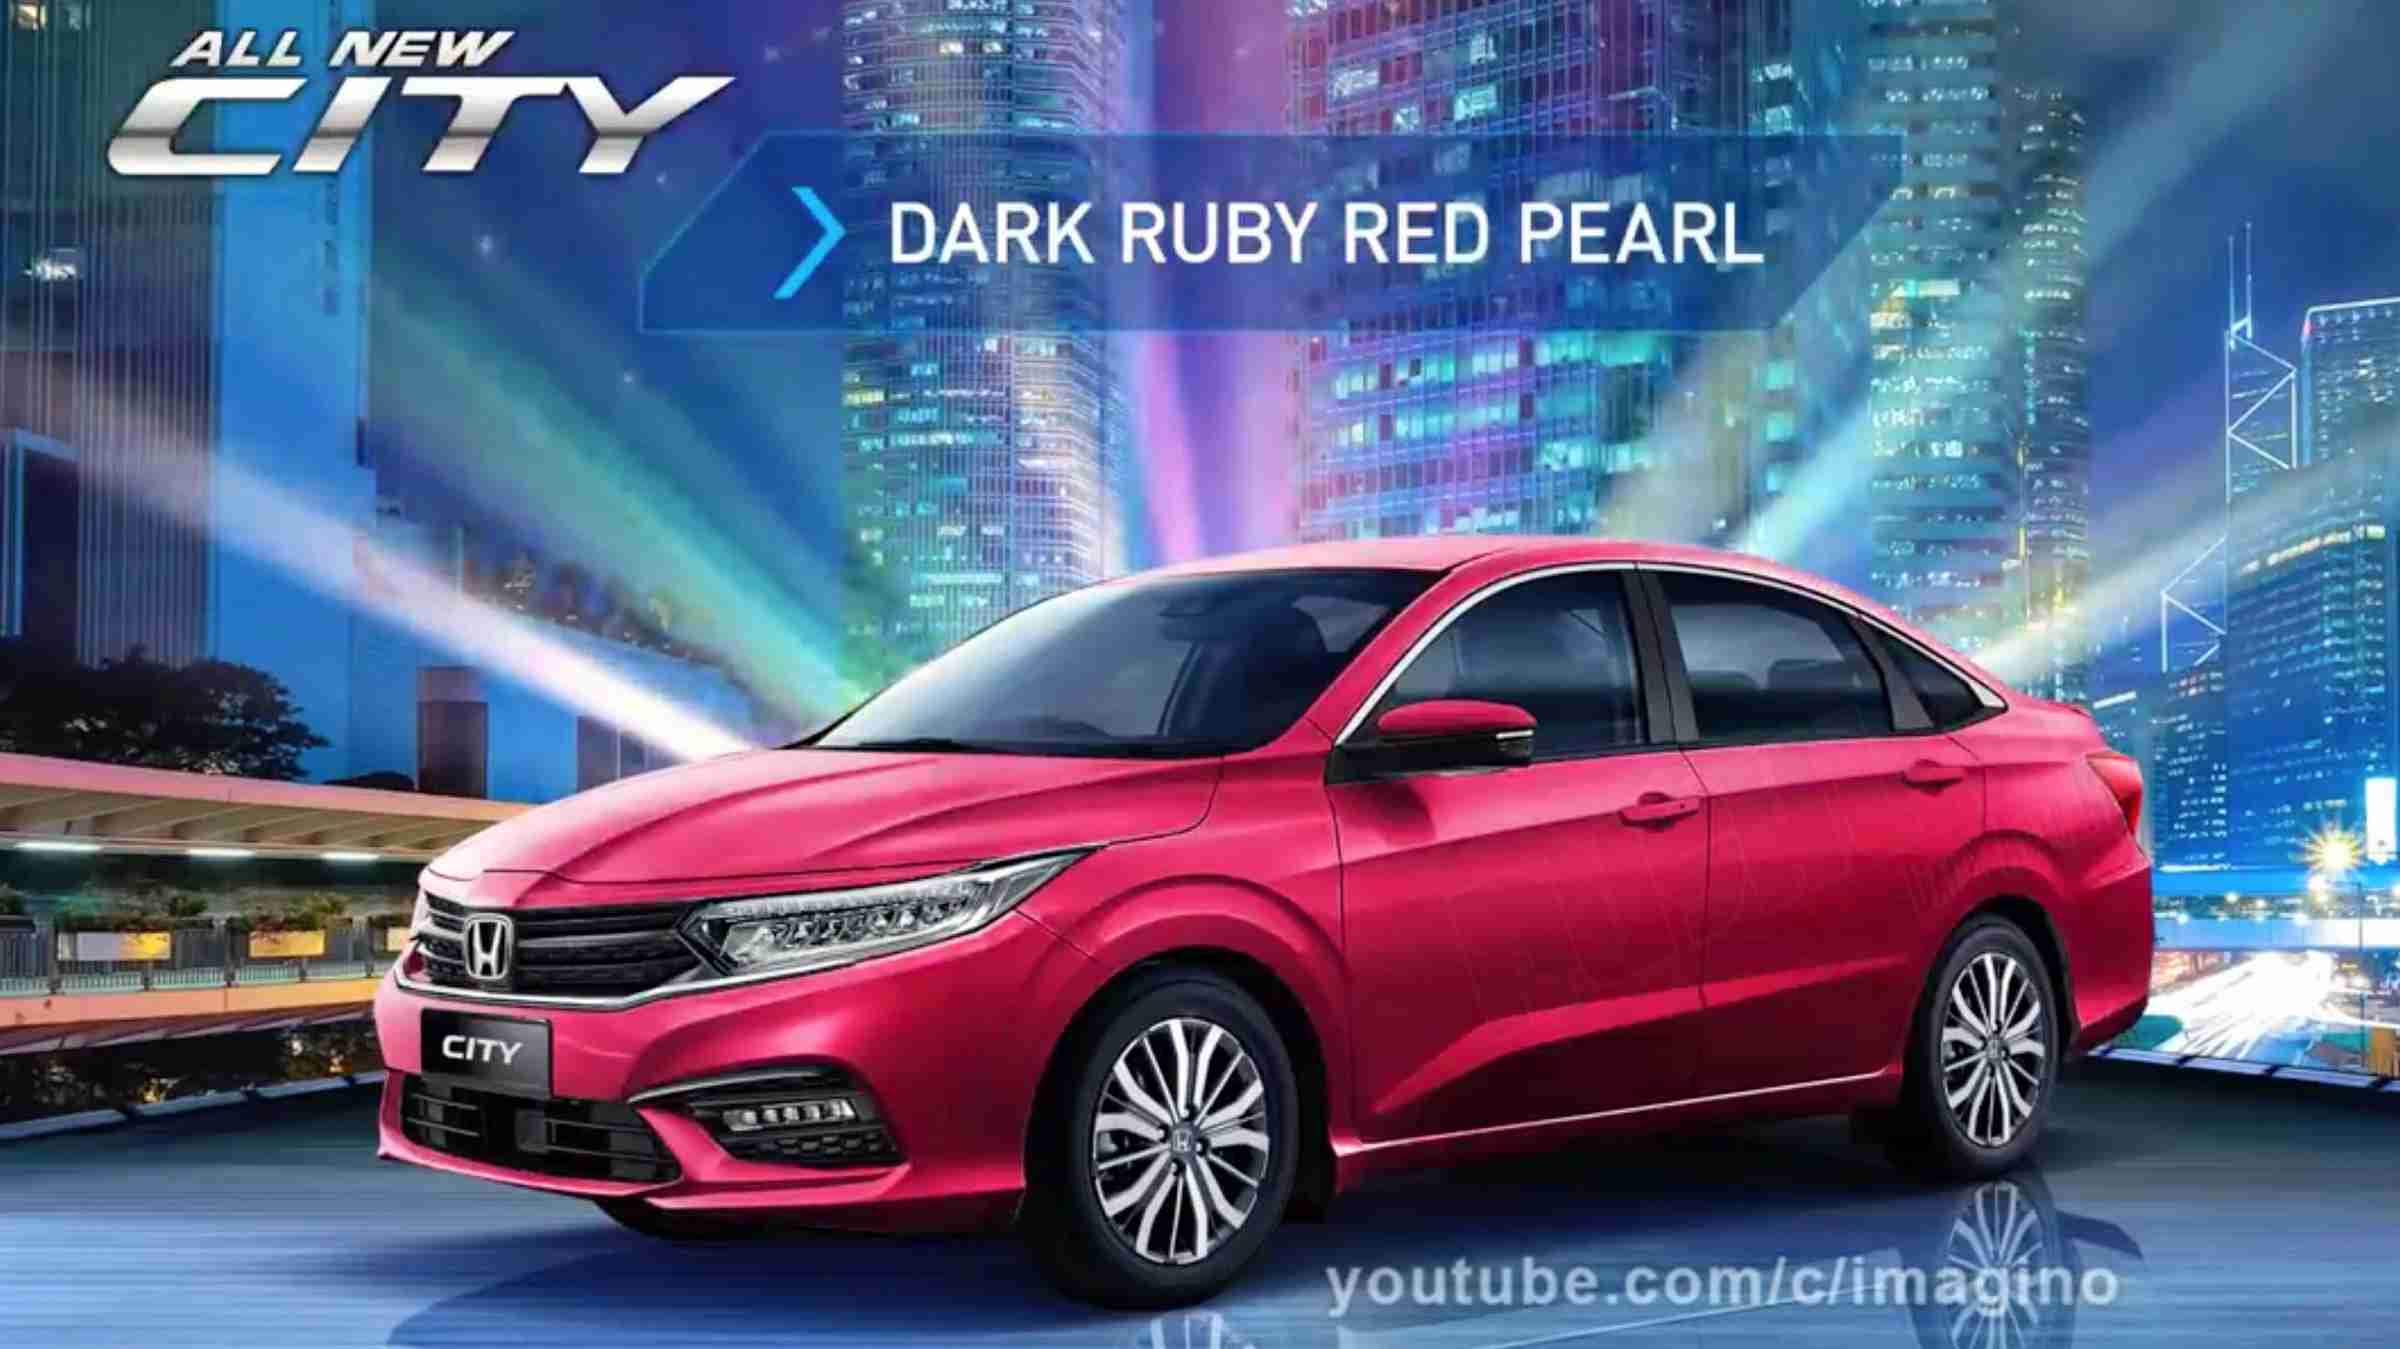 2020 Honda City front and rear design, multiple colours render - Video